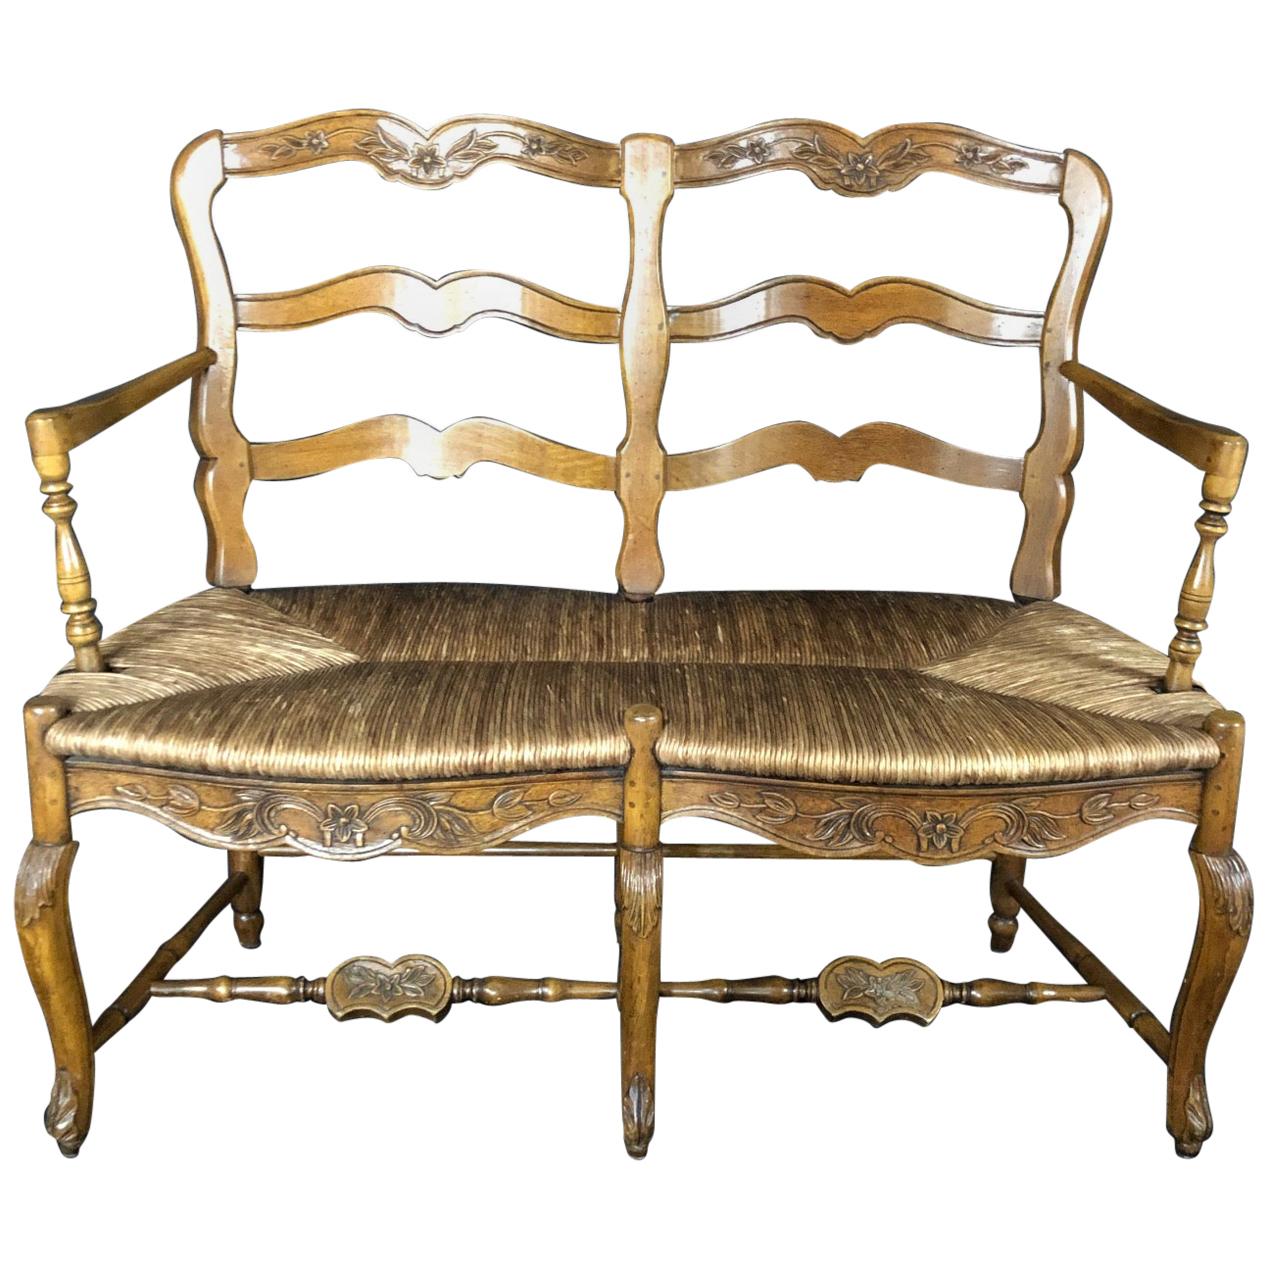 Exquisite Carved 19th Century French Walnut Ladderback Bench with Rush Seat